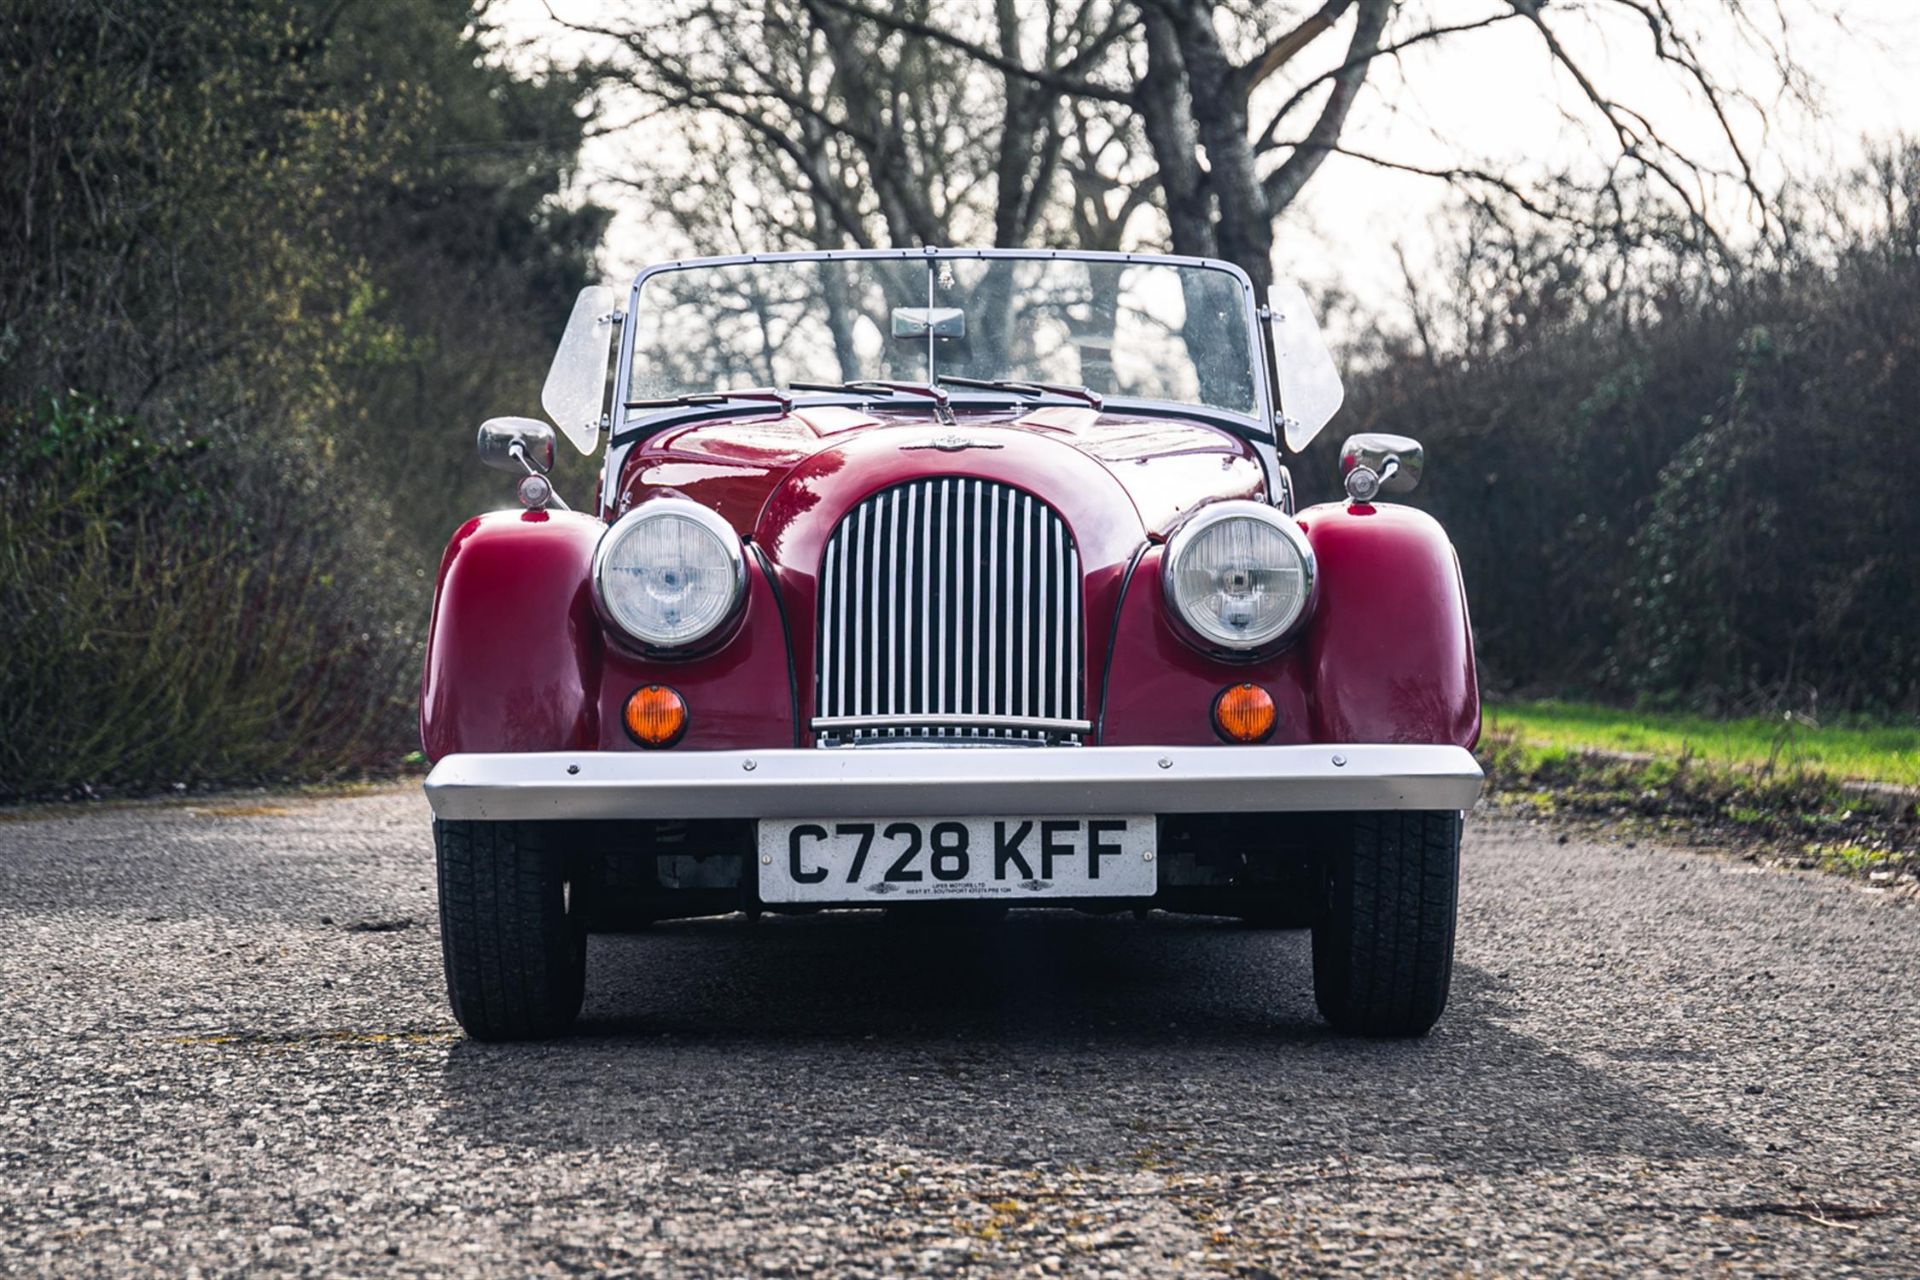 1986 Morgan 4/4 1600 (Four-Seater) - Image 3 of 20